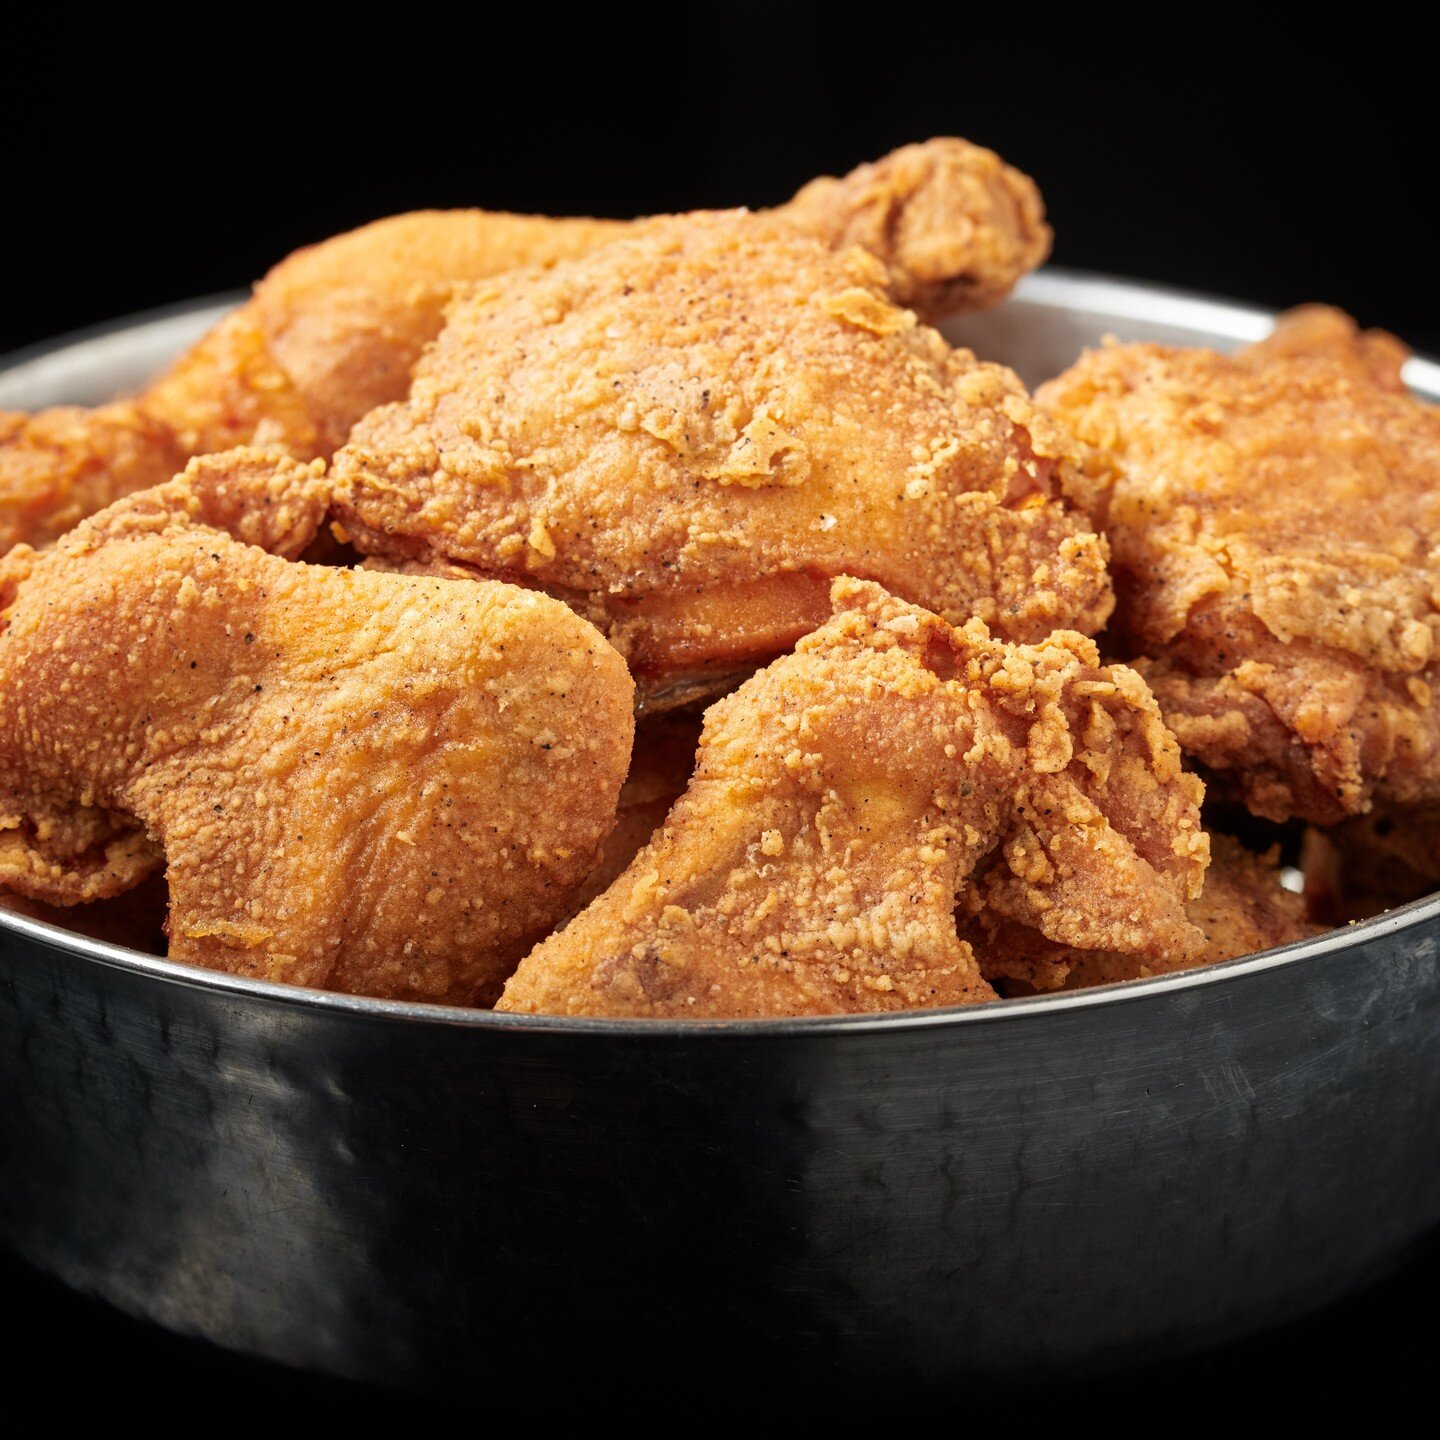 What could be better than a Monday Southern Fried Chicken Bucket 
and Happy Hour from 4PM - 6PM 

Time is clicking away order NOW! 

#friedchicken #bestfriedchickenintown #itsanapathing